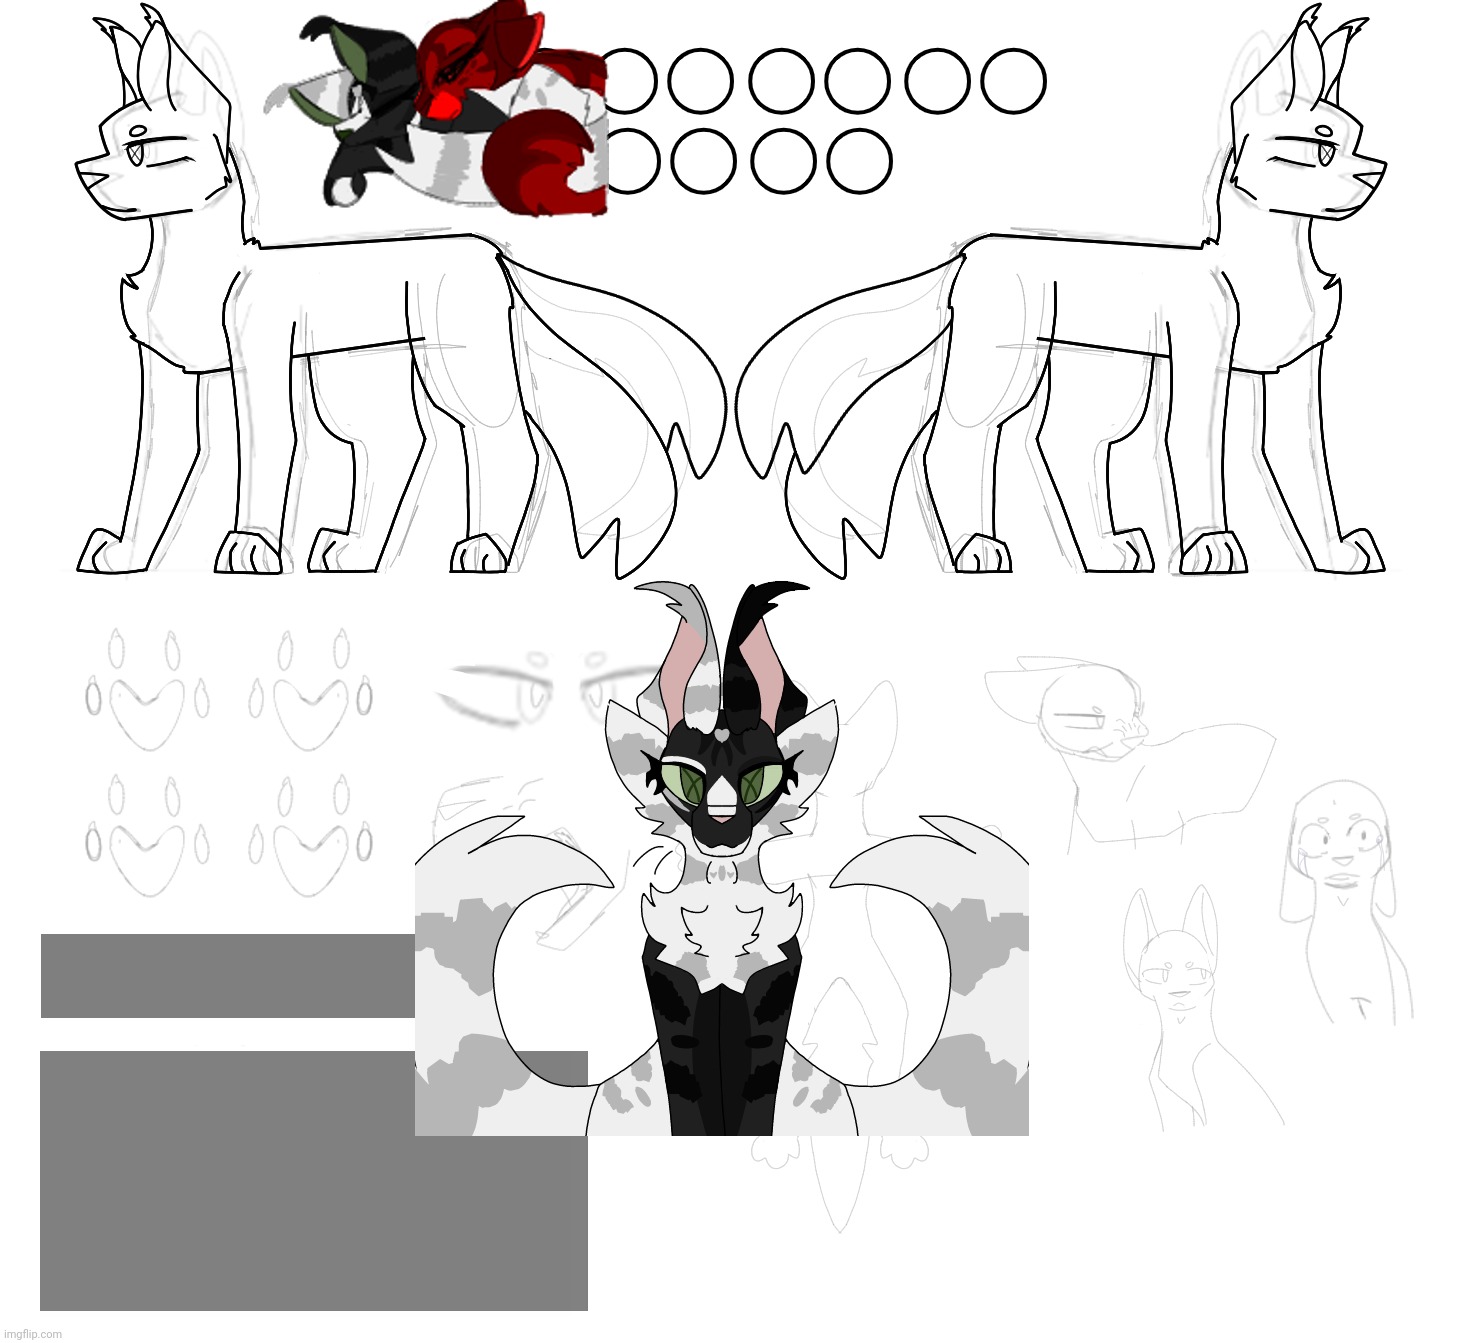 Ref im workin on | image tagged in i'll probally finish in tmr,sobing noises,refs take so long for me to finish | made w/ Imgflip meme maker